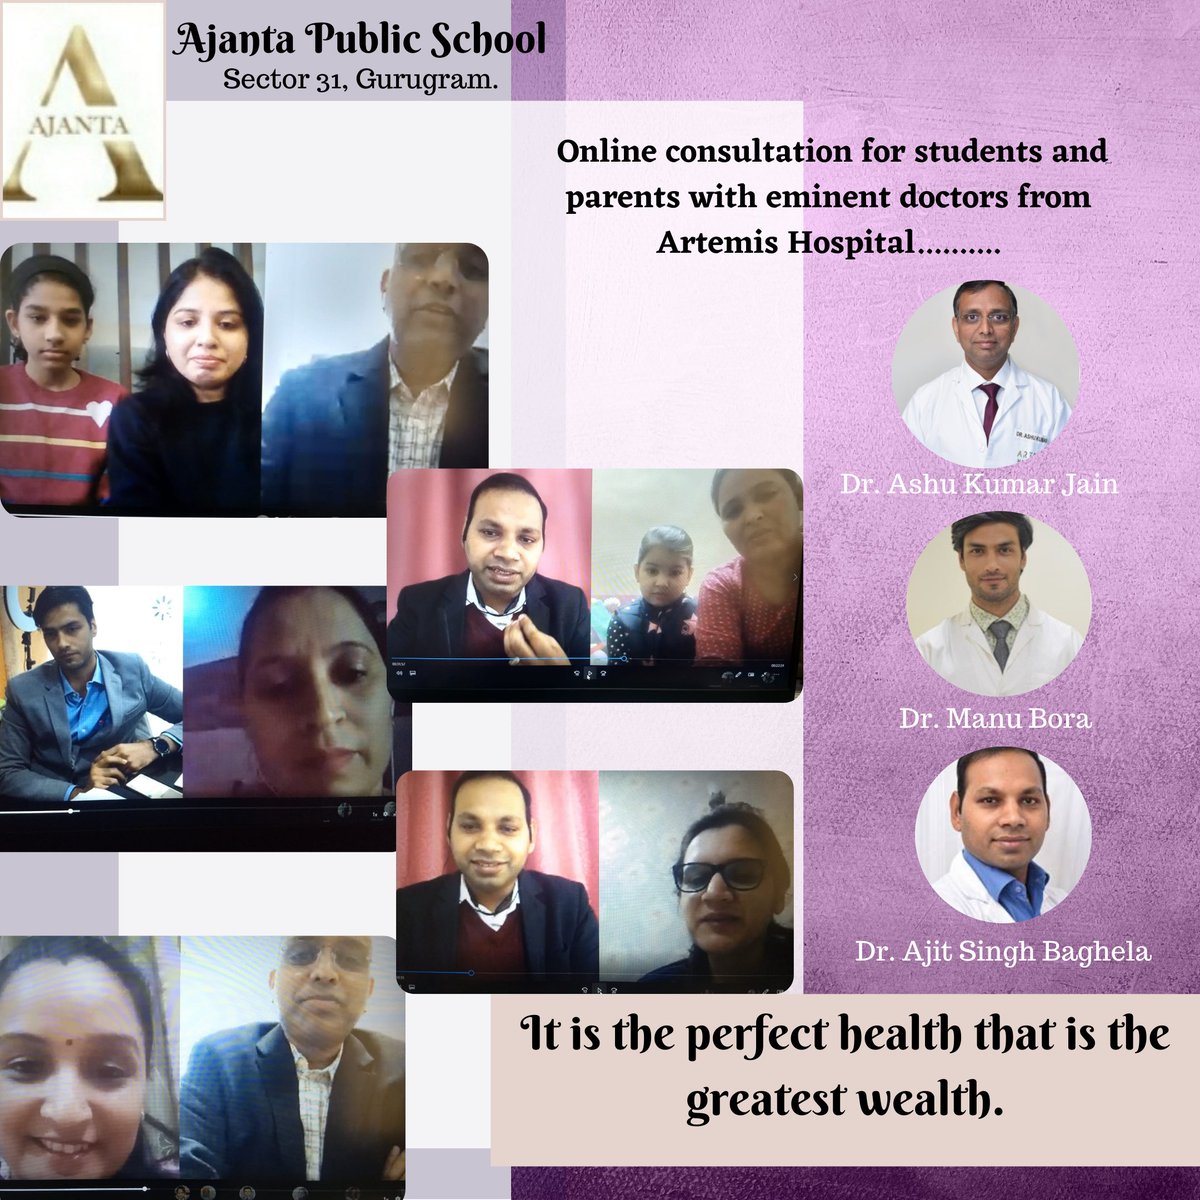 Let's be good Samaritans and help our society maintain good health. I wholeheartedly appreciate the efforts of the three doctors from Artemis Hospital, Gurugram, who spent three days of online consultion and helping the students and parents of @SchoolAjanta @MicrosoftEDU @HPSC20